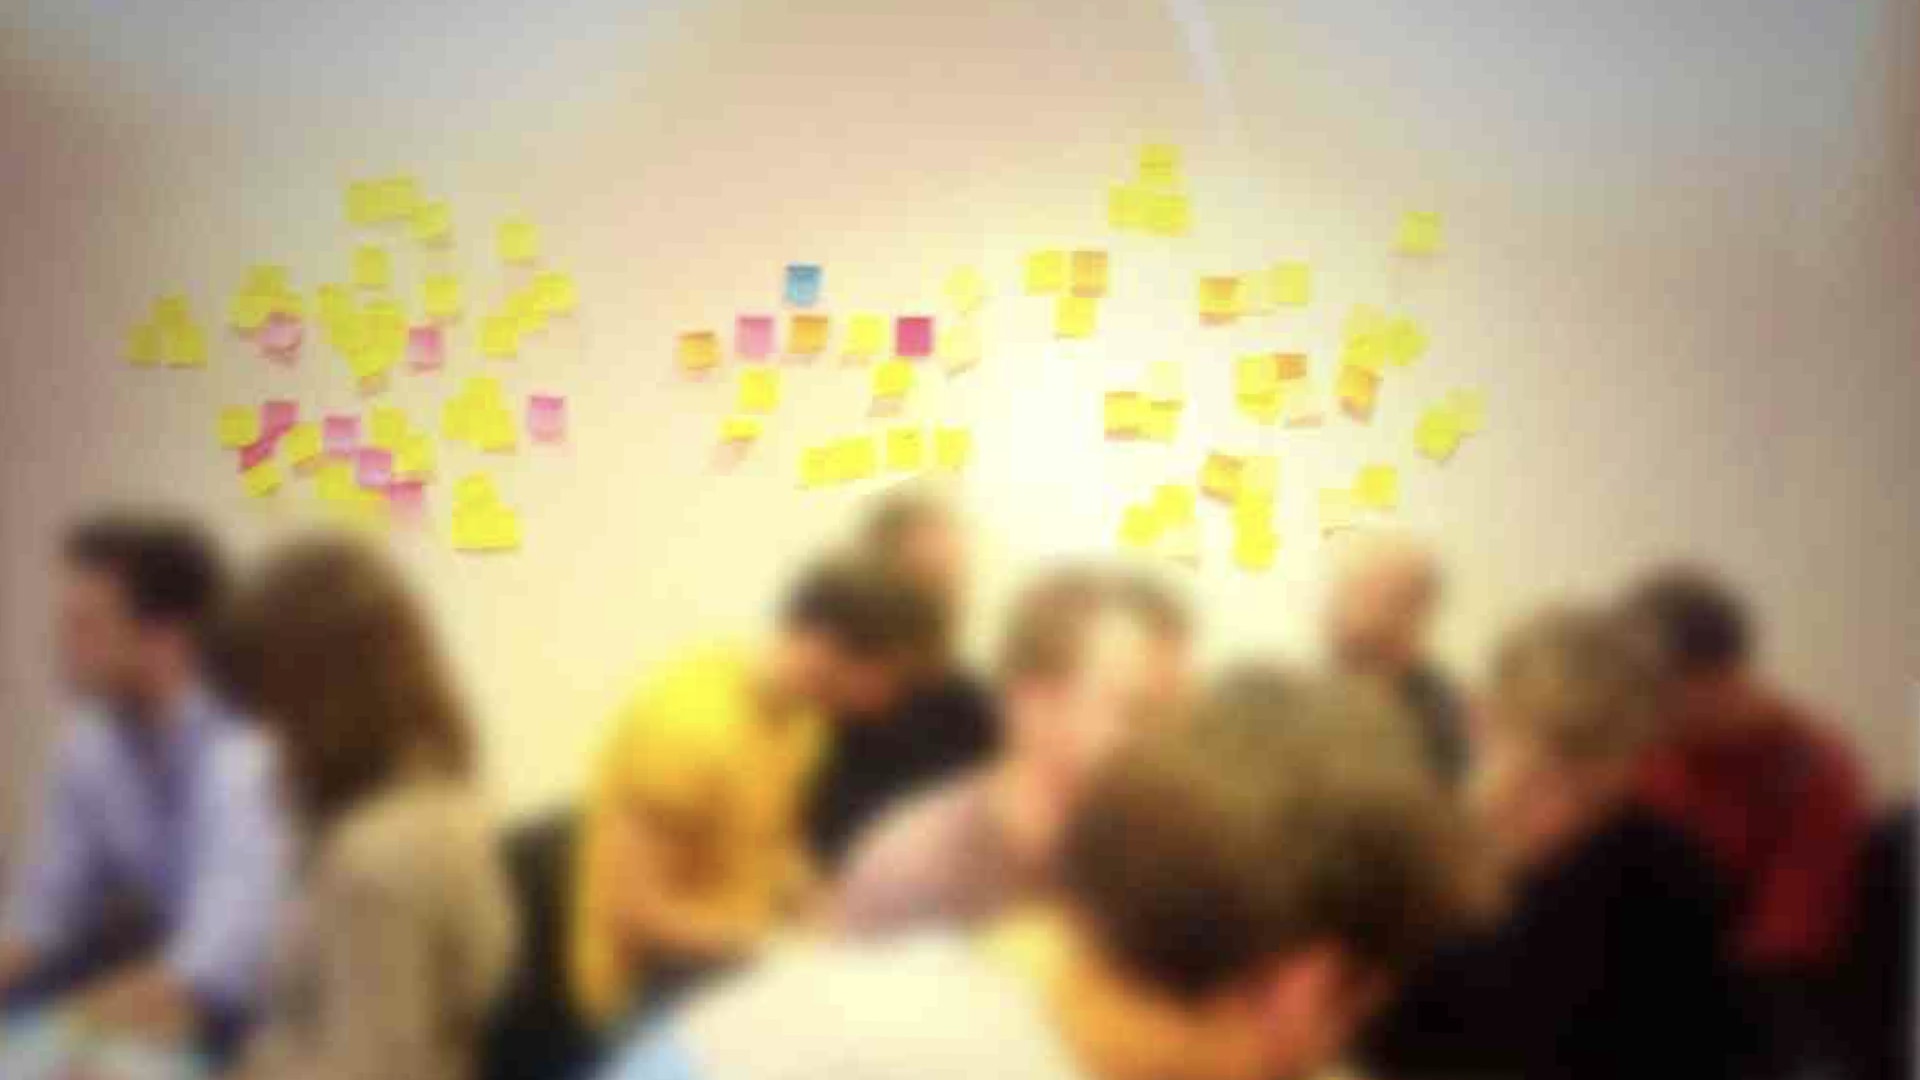 A photo of a group of people in front of a wall with lots of post-it notes on. The people have been blurred out.